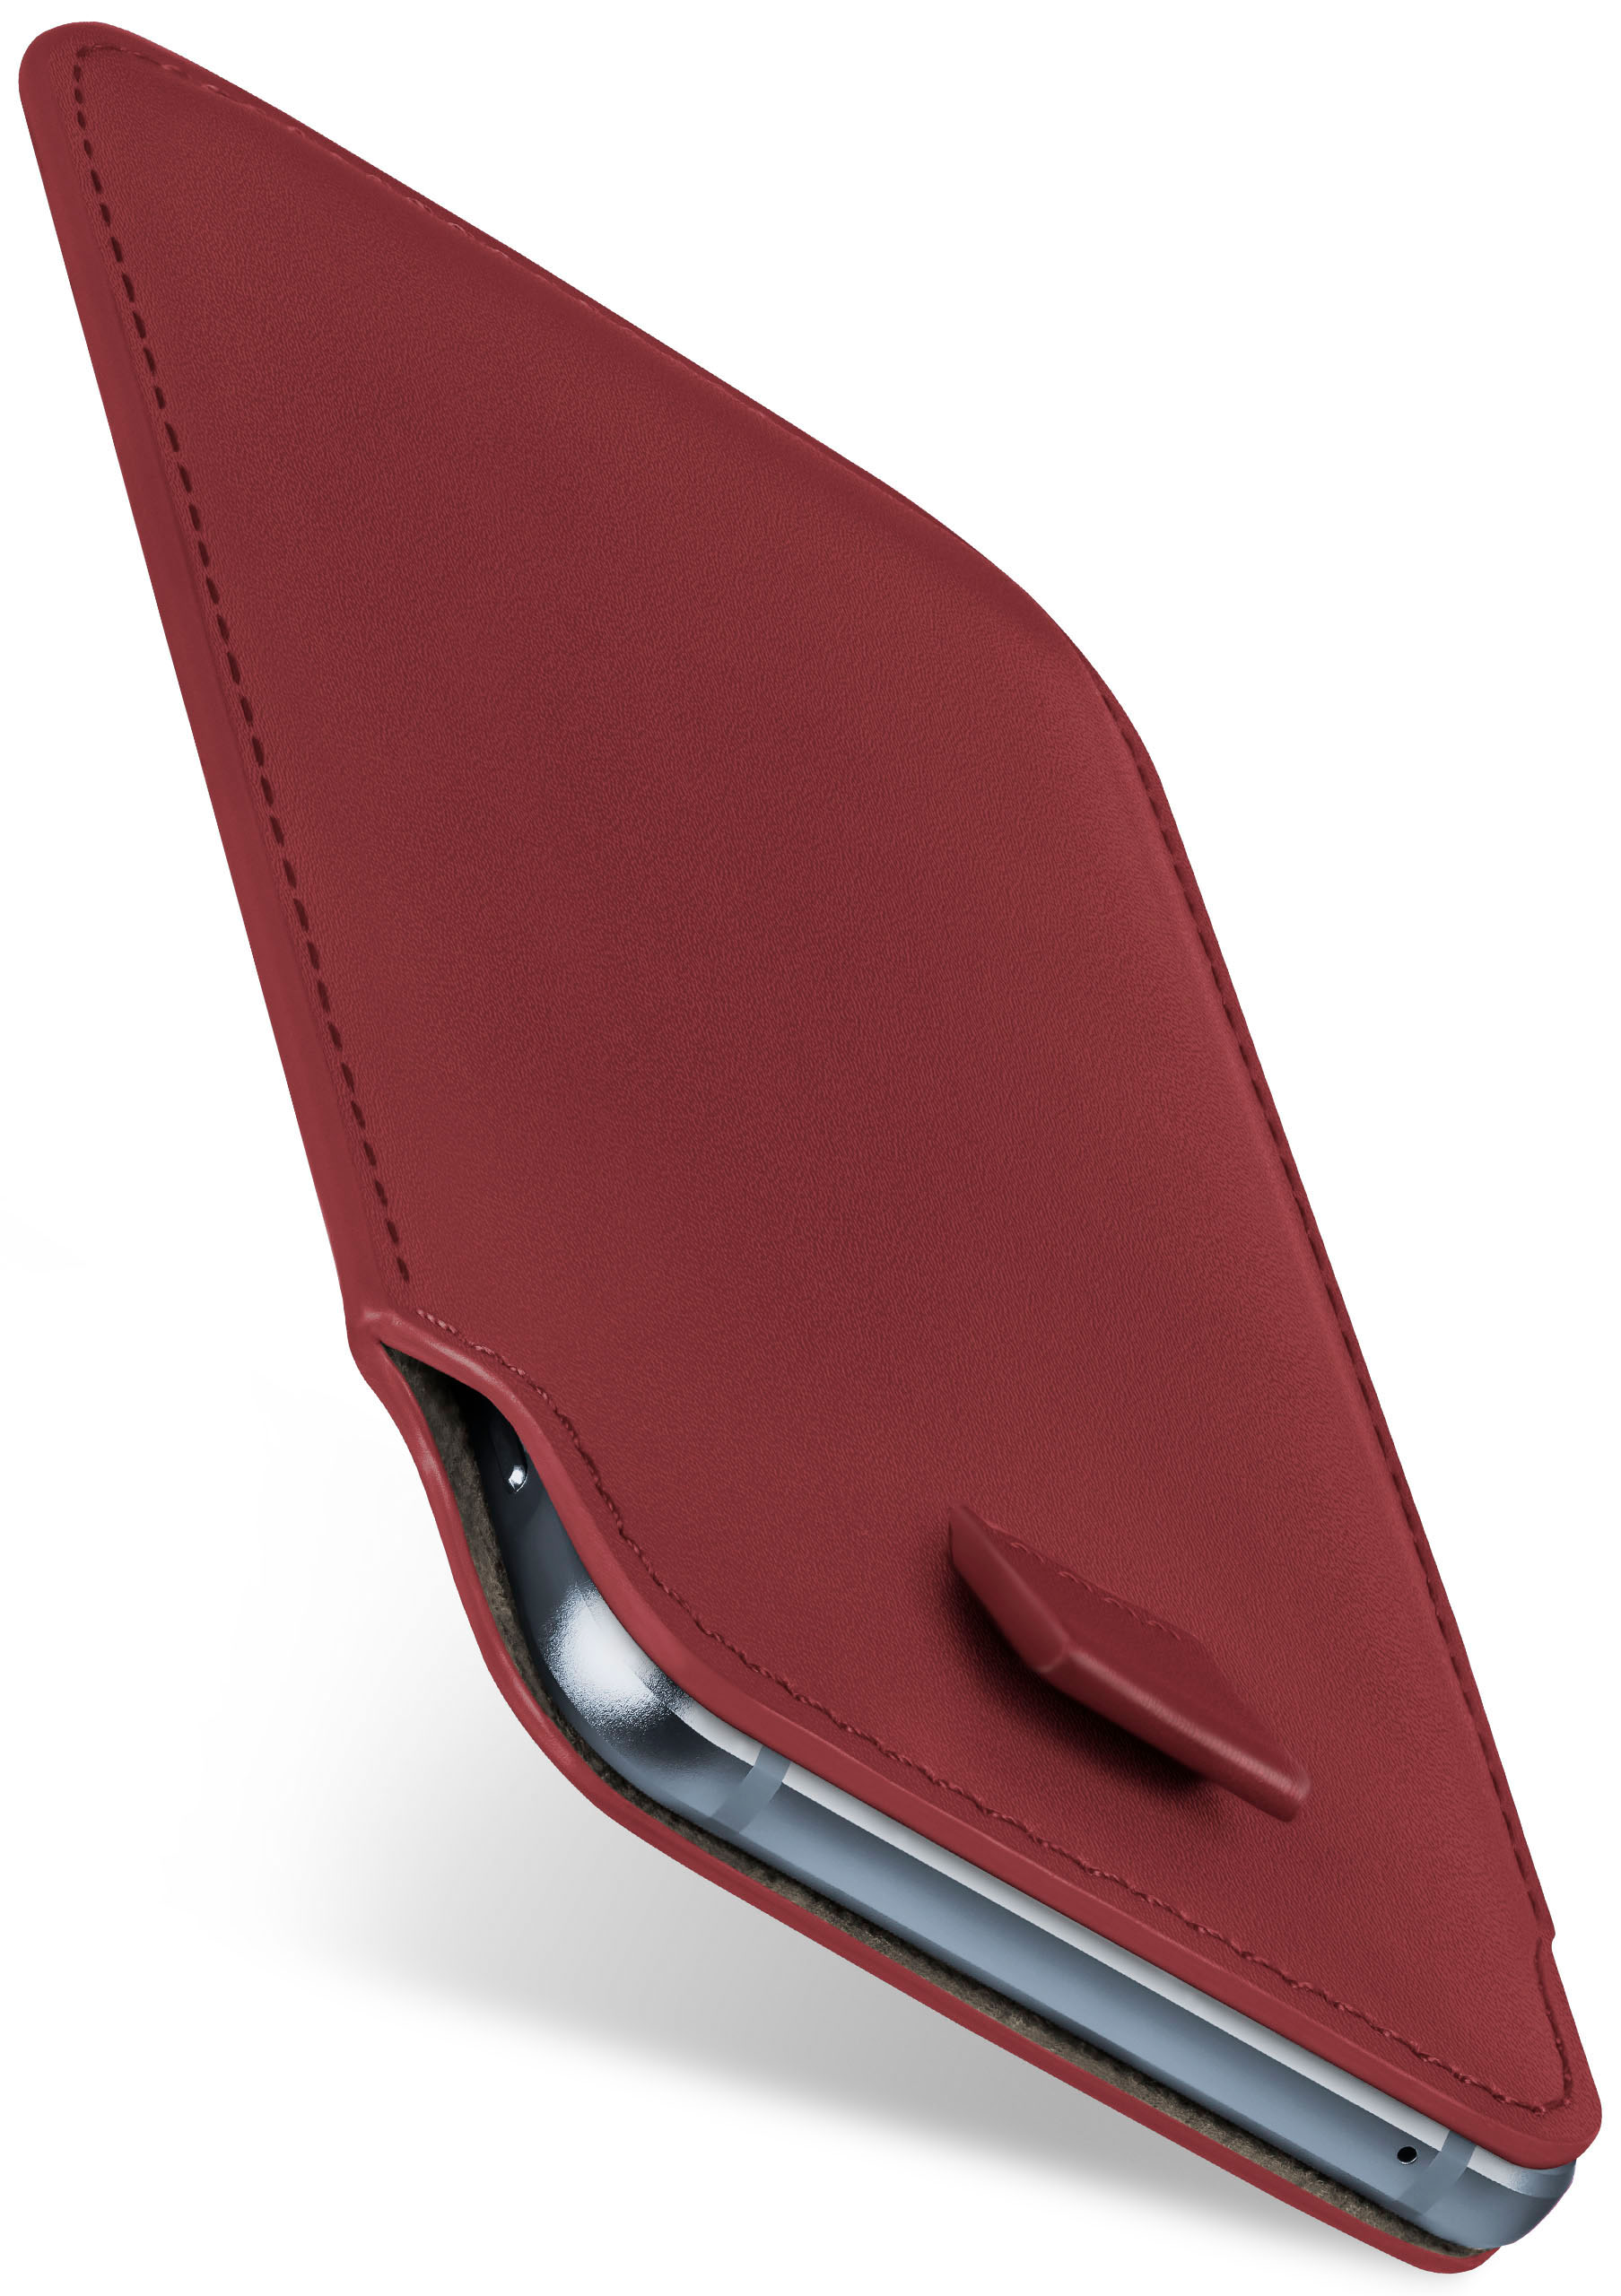 A6 (2018), Case, Maroon-Red Slide Samsung, MOEX Full Cover, Galaxy